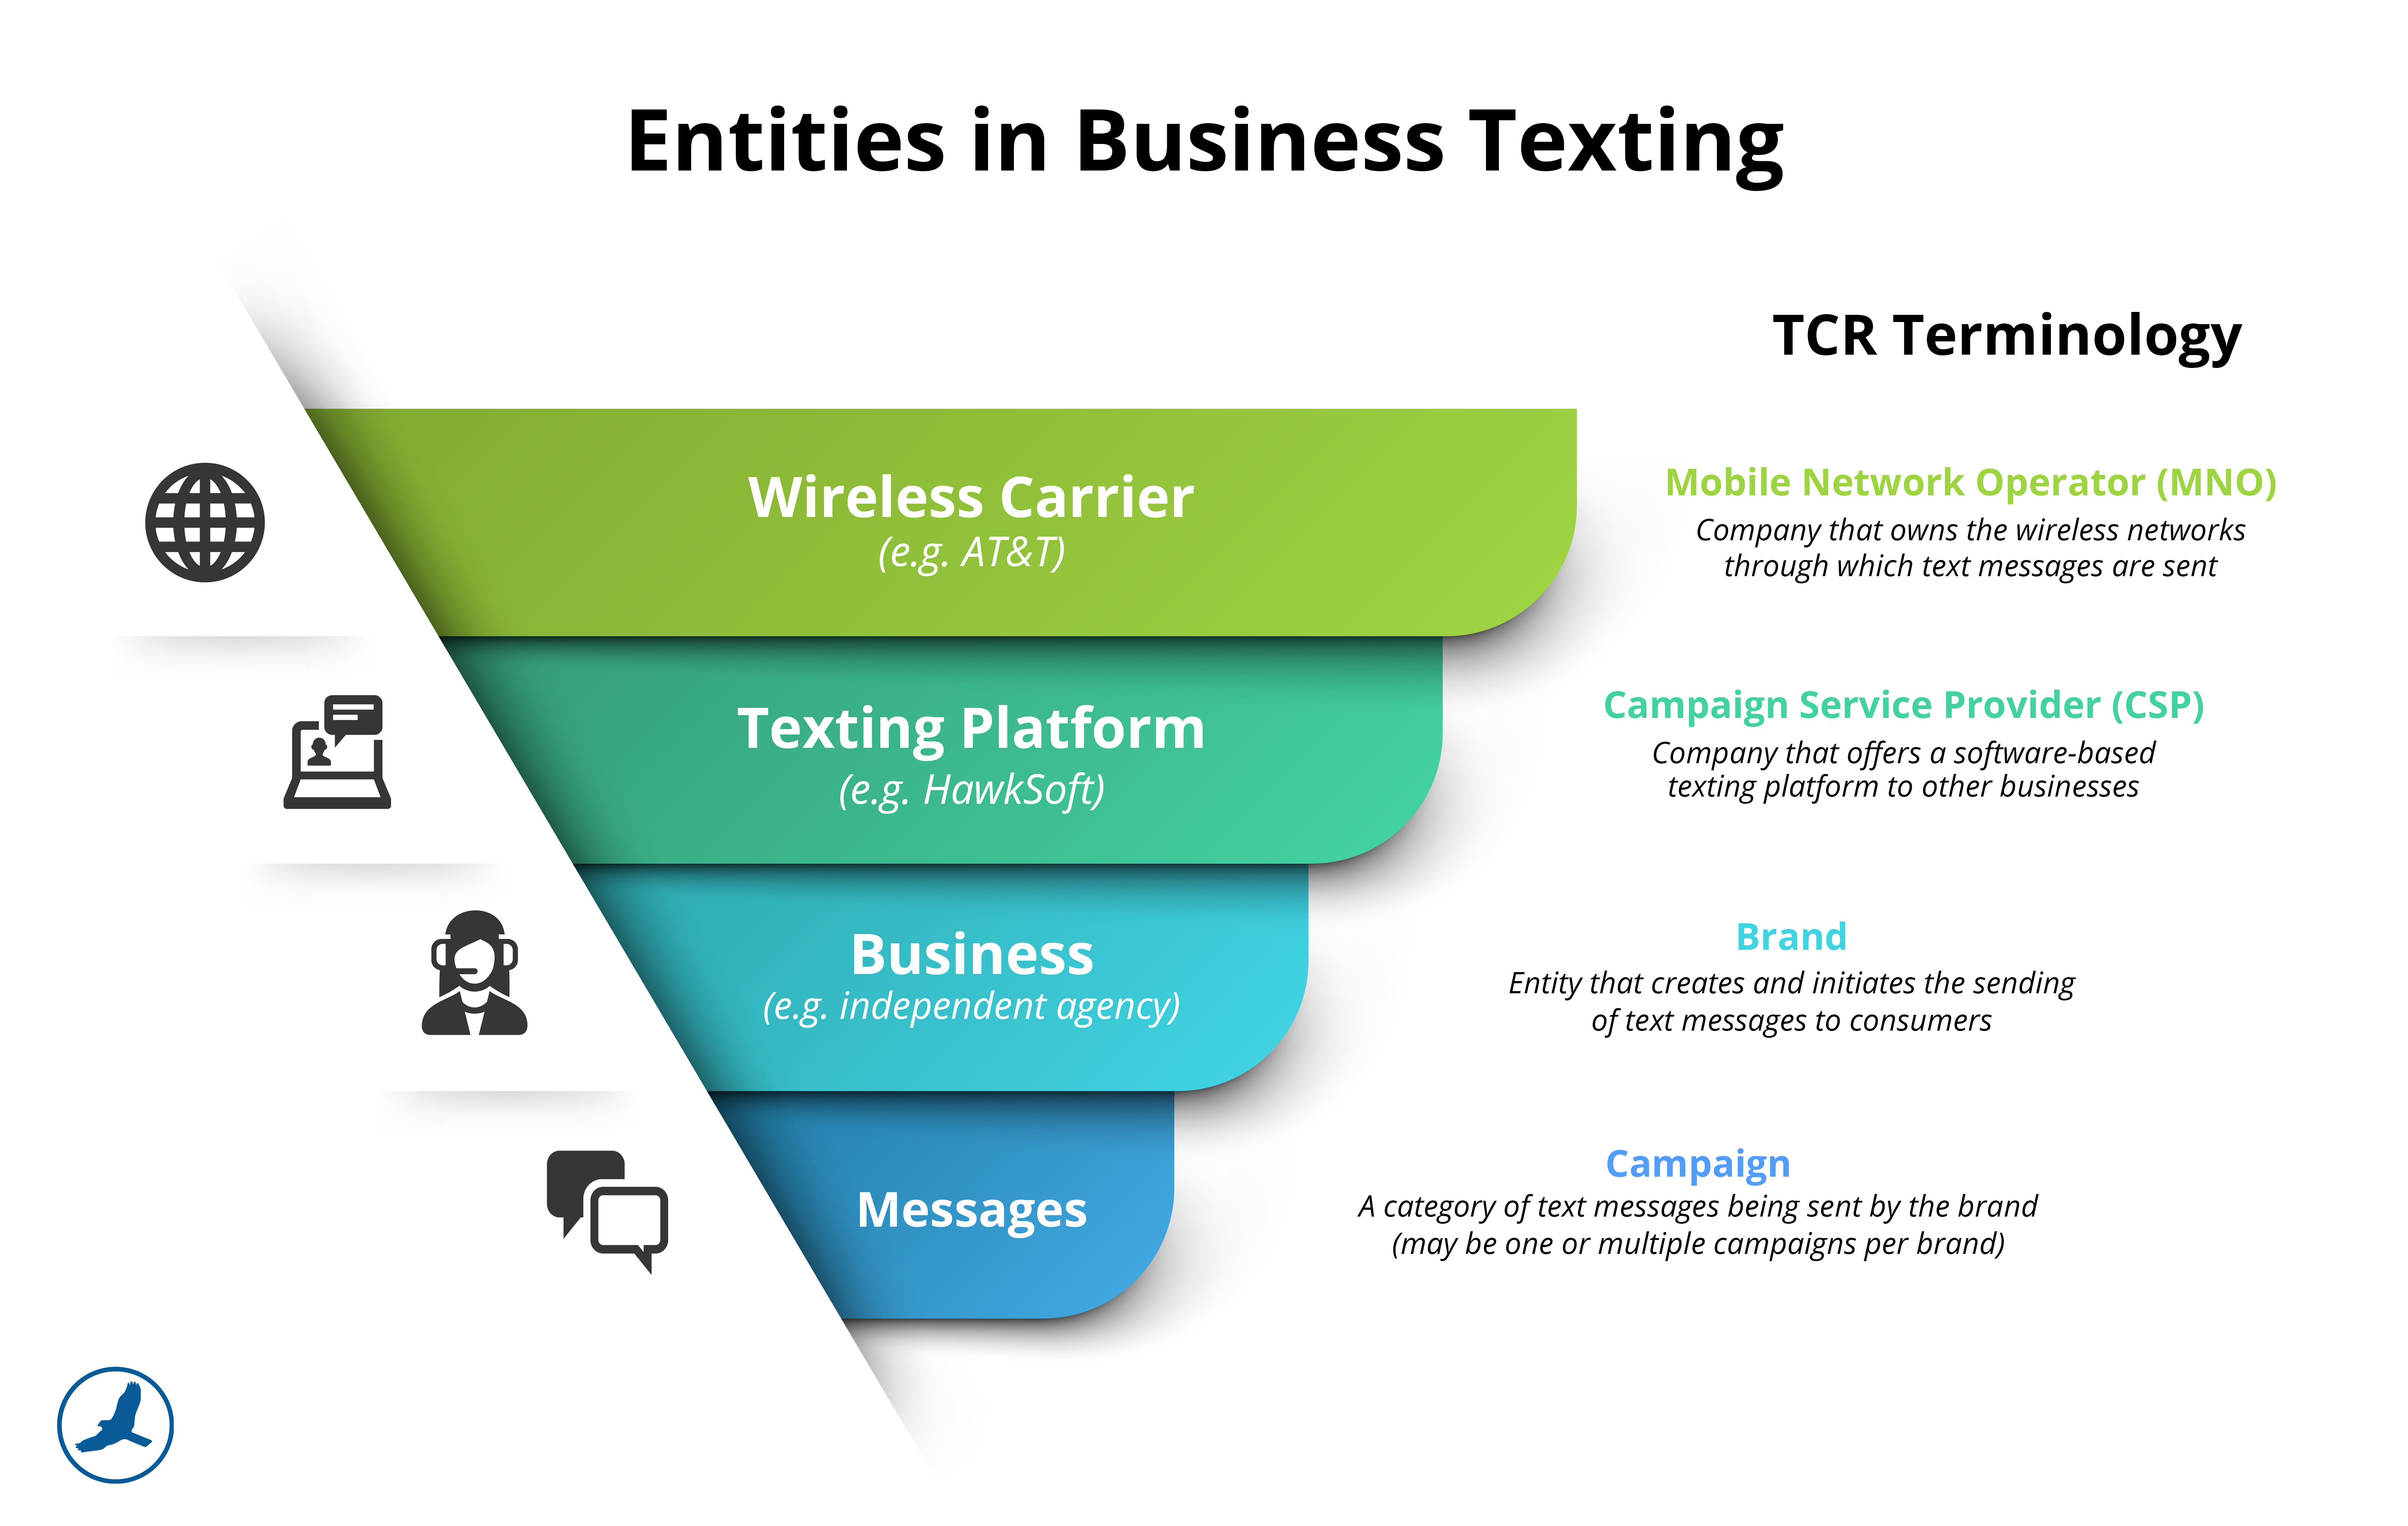 Entities in Business Texting